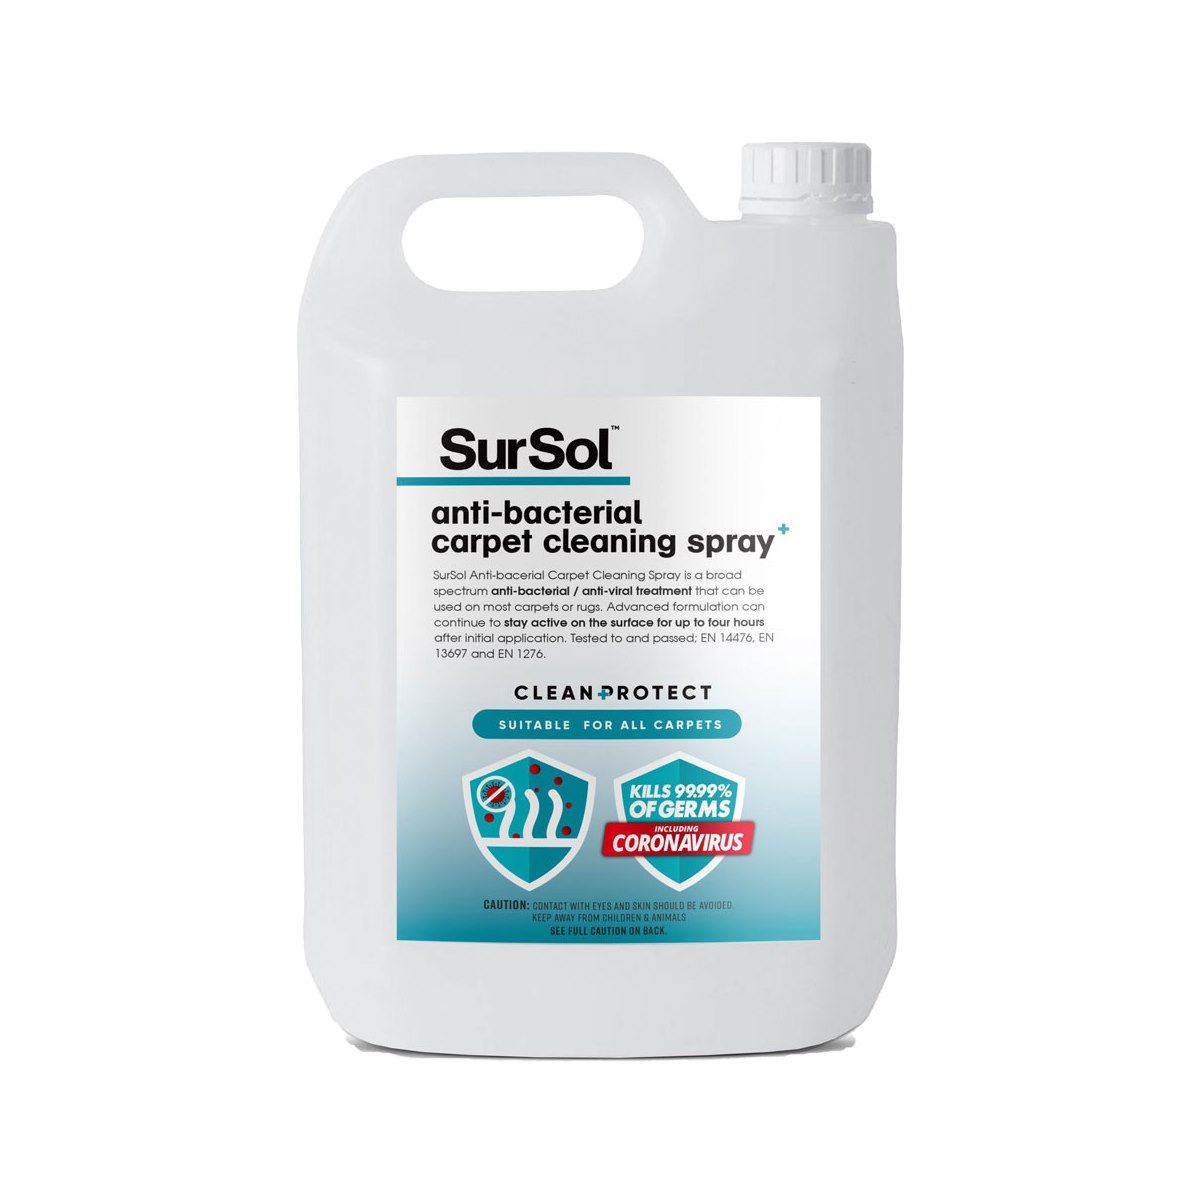 SurSol Anti-Bacterial Carpet Cleaning Spray 5 Litre